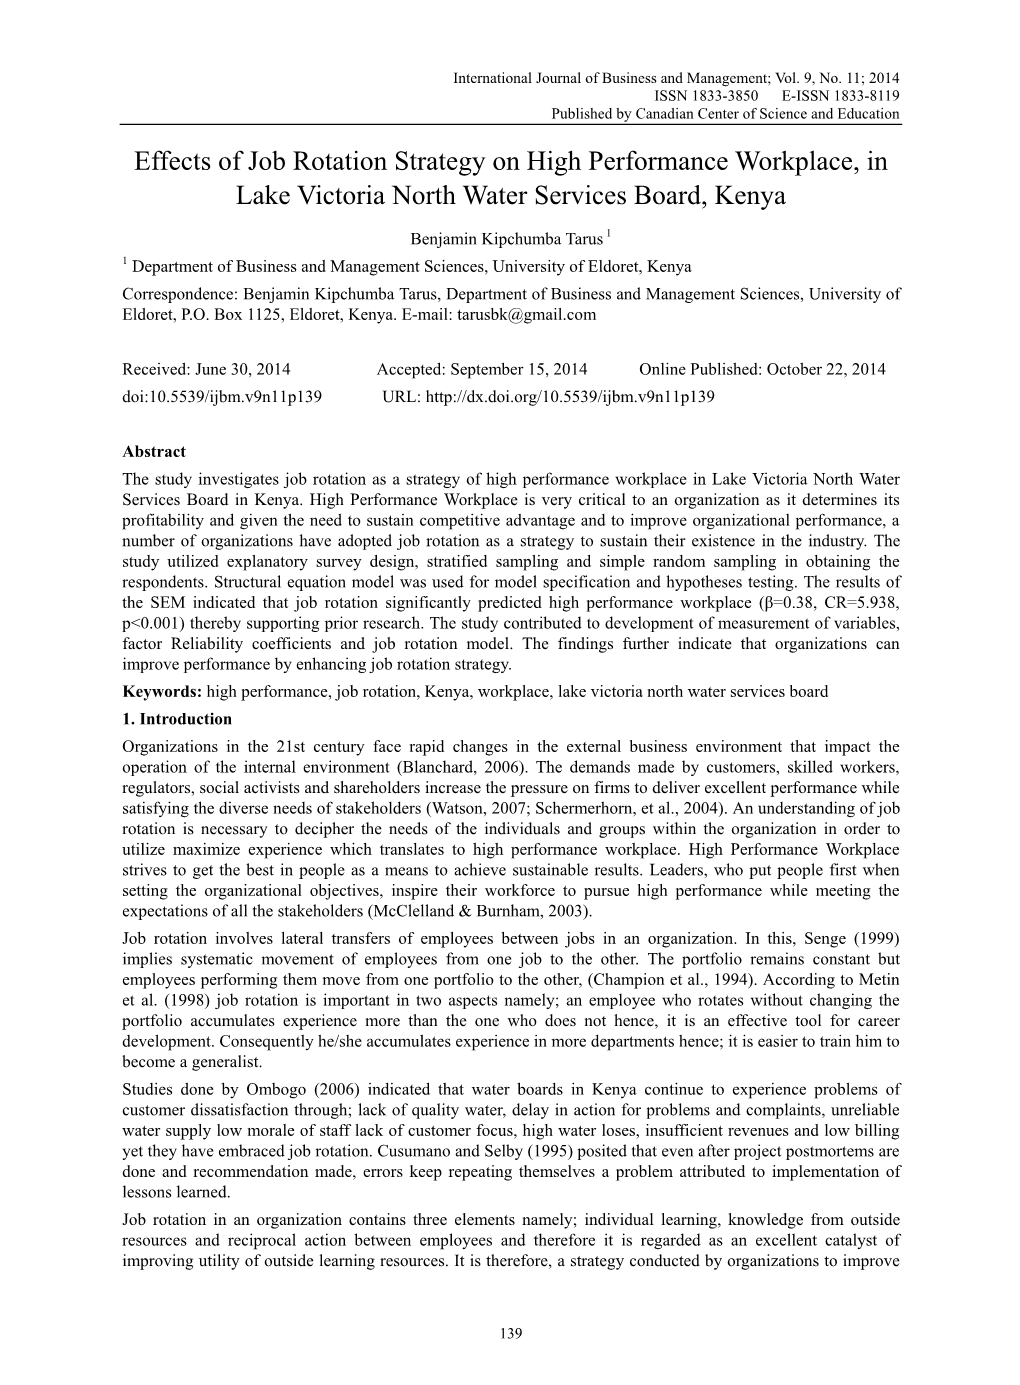 Effects of Job Rotation Strategy on High Performance Workplace, in Lake Victoria North Water Services Board, Kenya